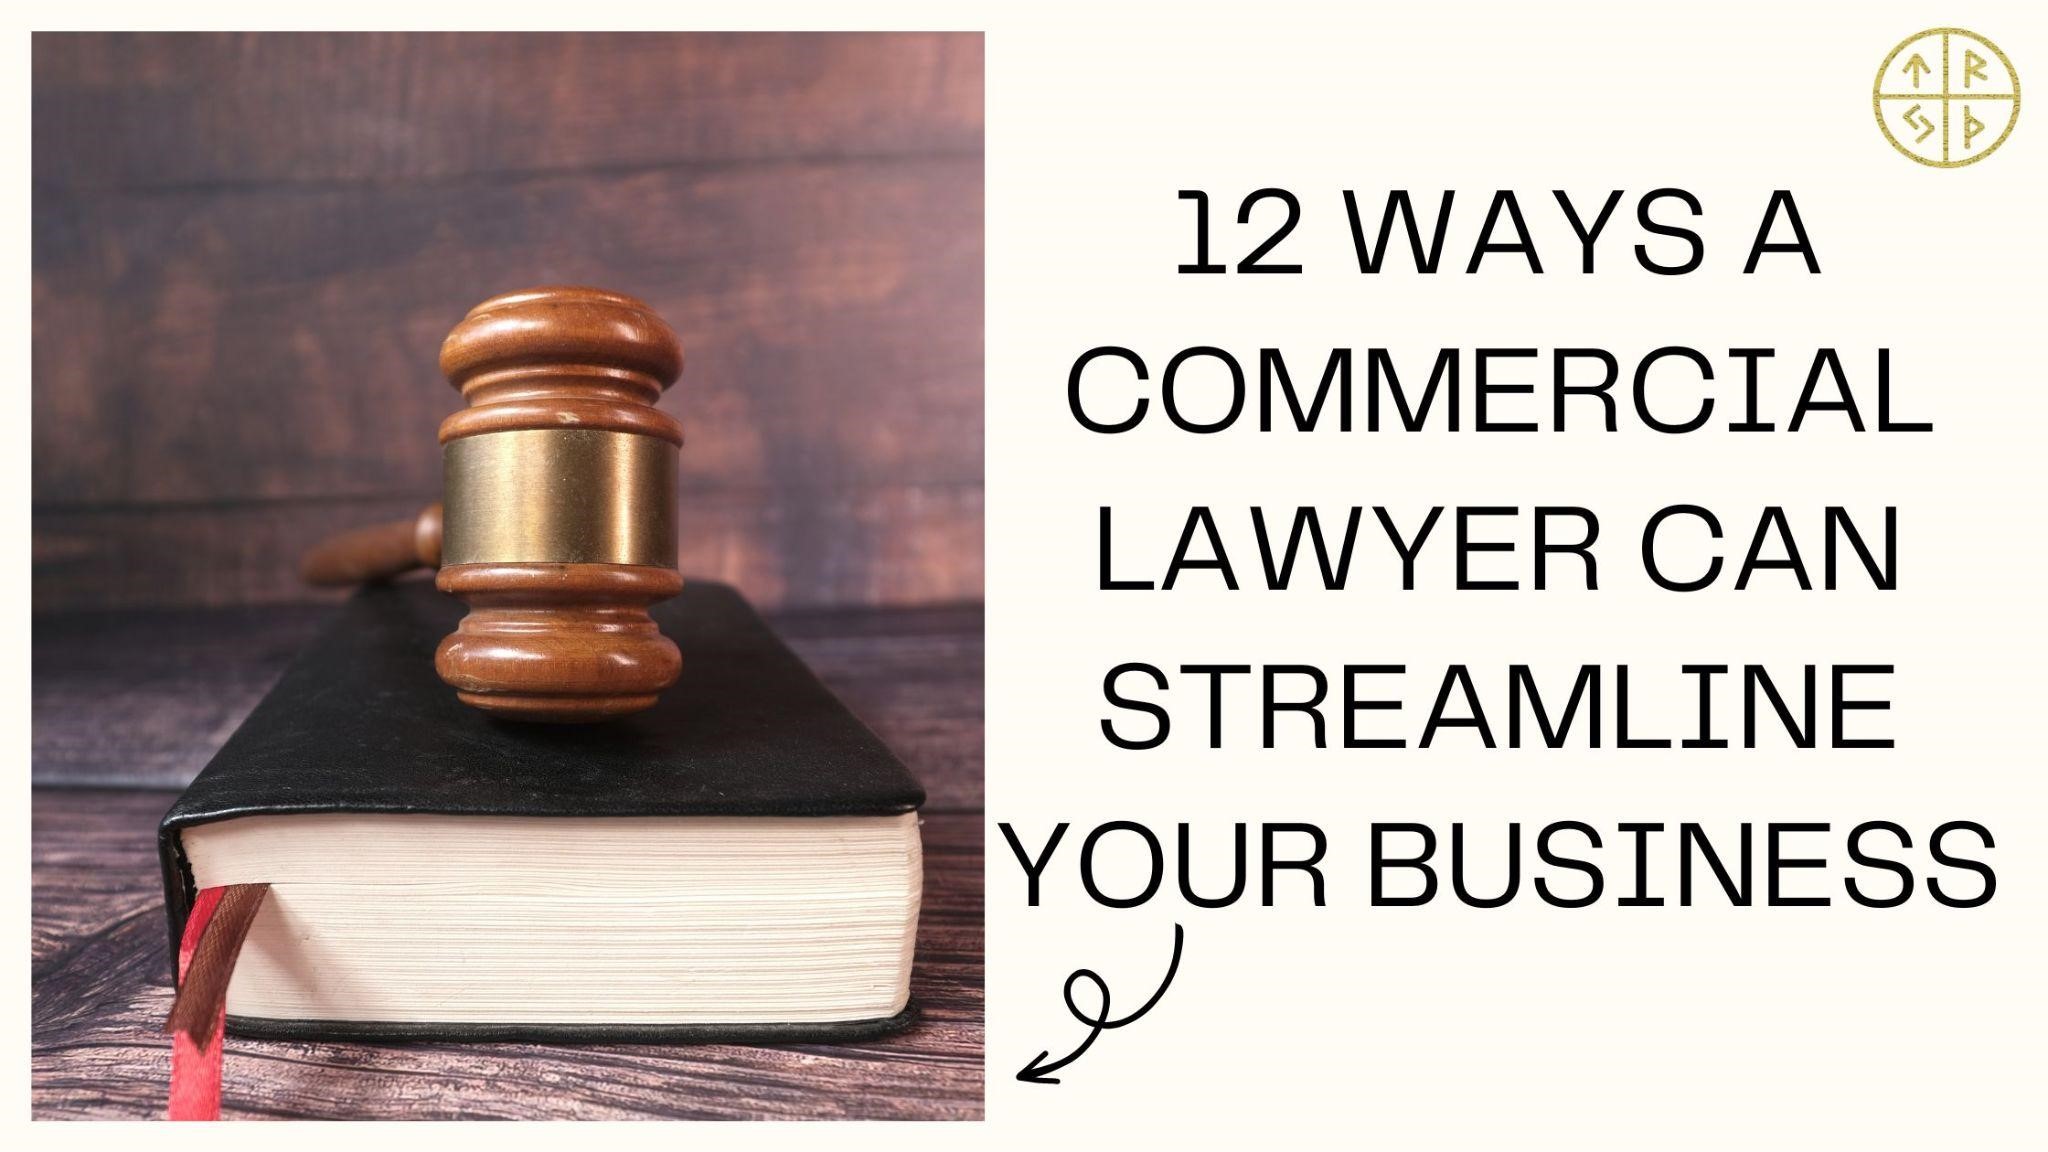 12 Ways a Commercial Lawyer Can Streamline Your Business